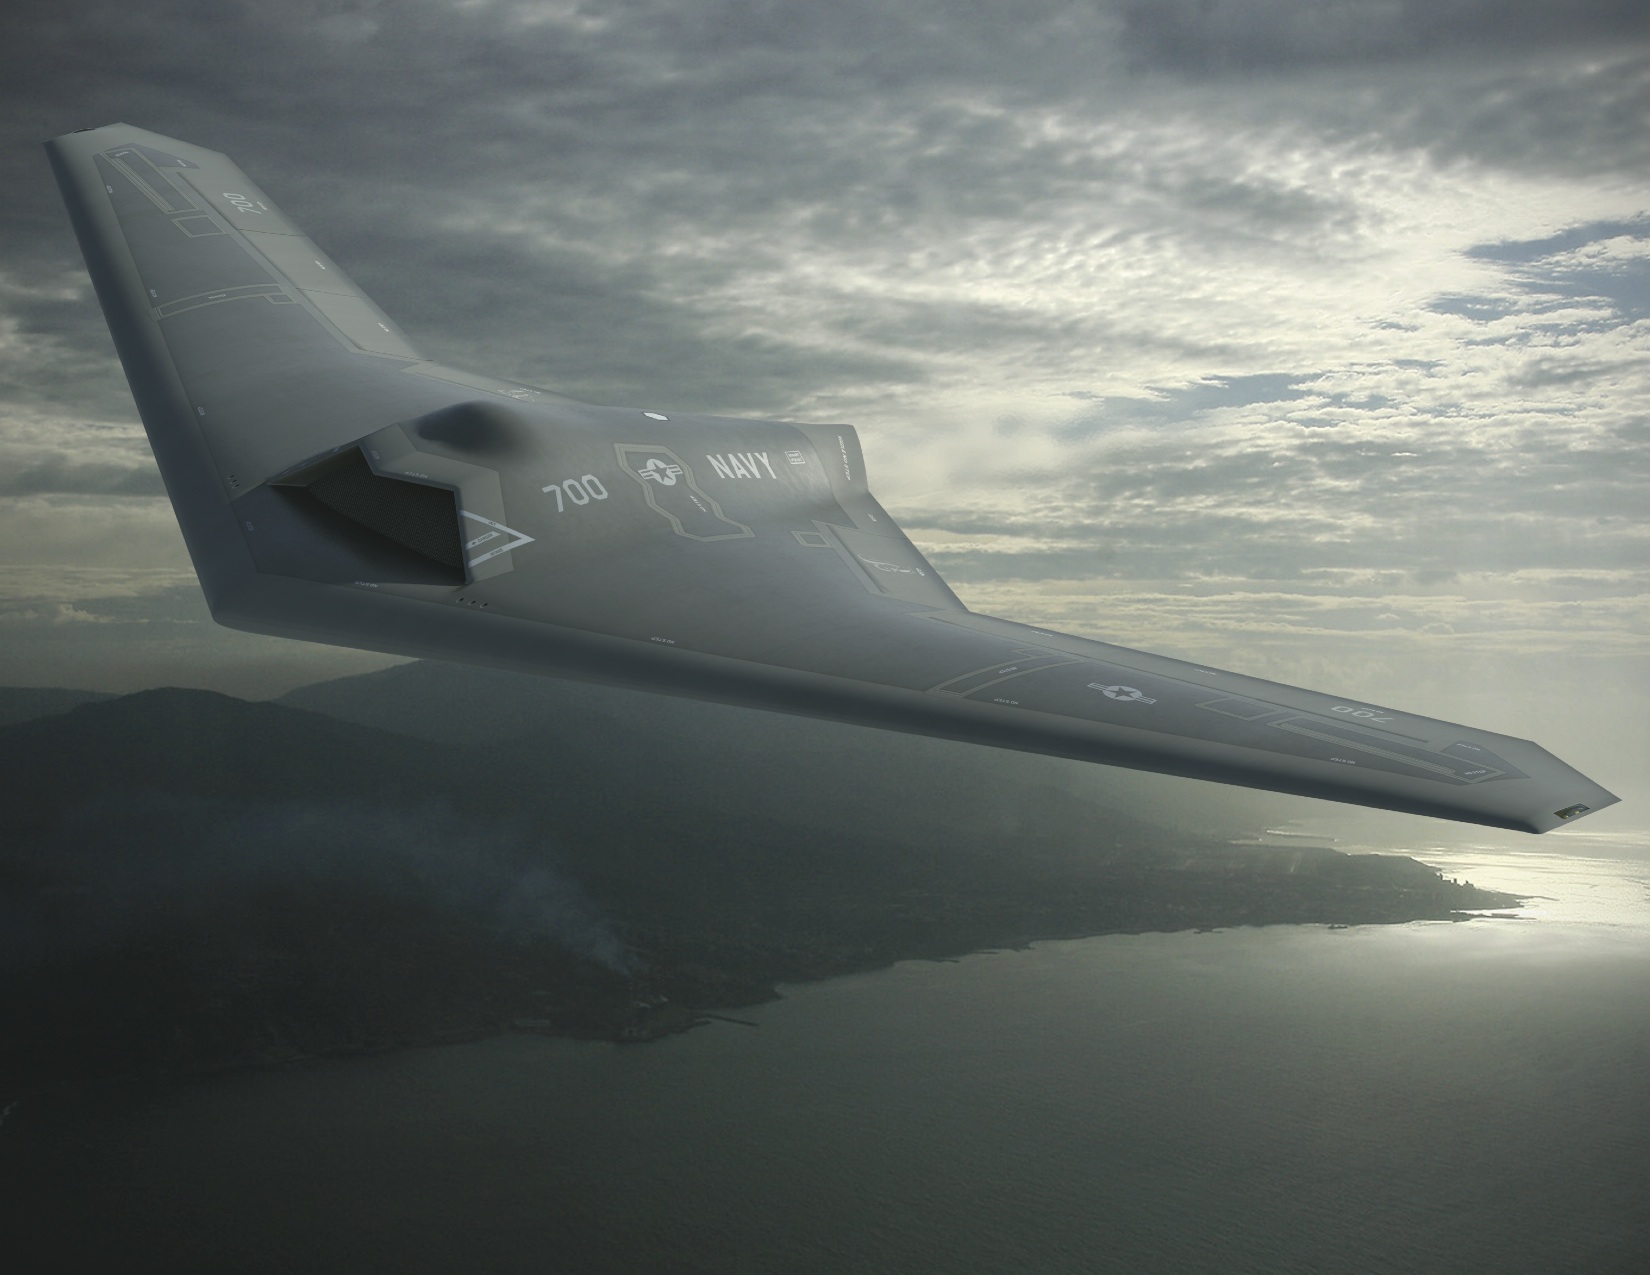 On April 8, 2013, Lockheed Martin Skunk Works introduced its entry into the U.S. Navy's Unmanned Carrier Launched Surveillance and Strike (UCLASS) program. The single engine aircraft concept, sometimes referred to as "Sea Ghost". It features advanced signature control with multi-spectral stealth, communications, and bandwidth management to prevent enemy detection.